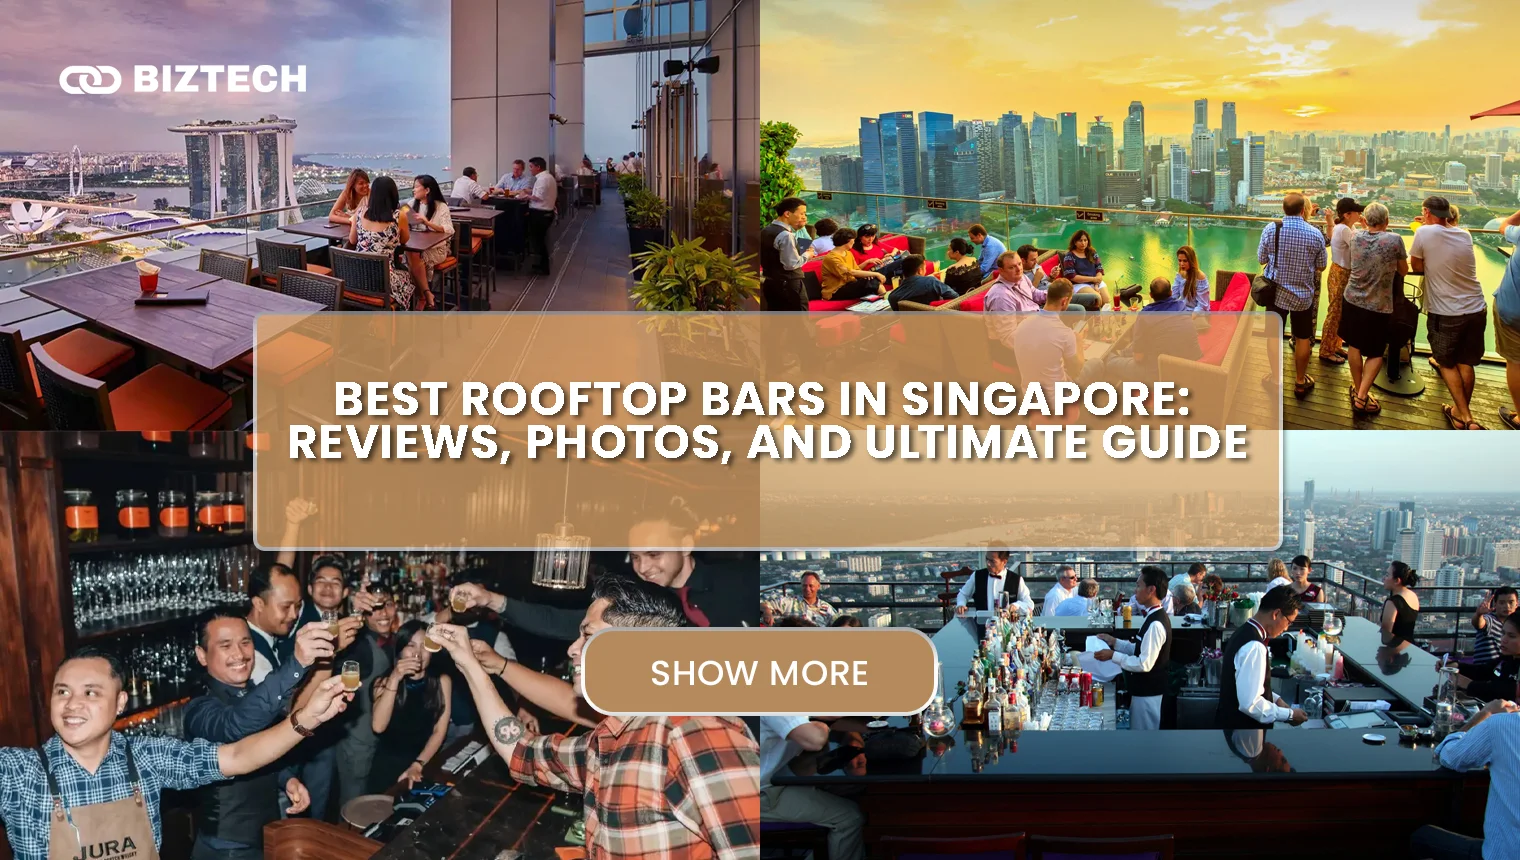 Best Rooftop Bars in Singapore: Reviews, Photos, and Ultimate Guide